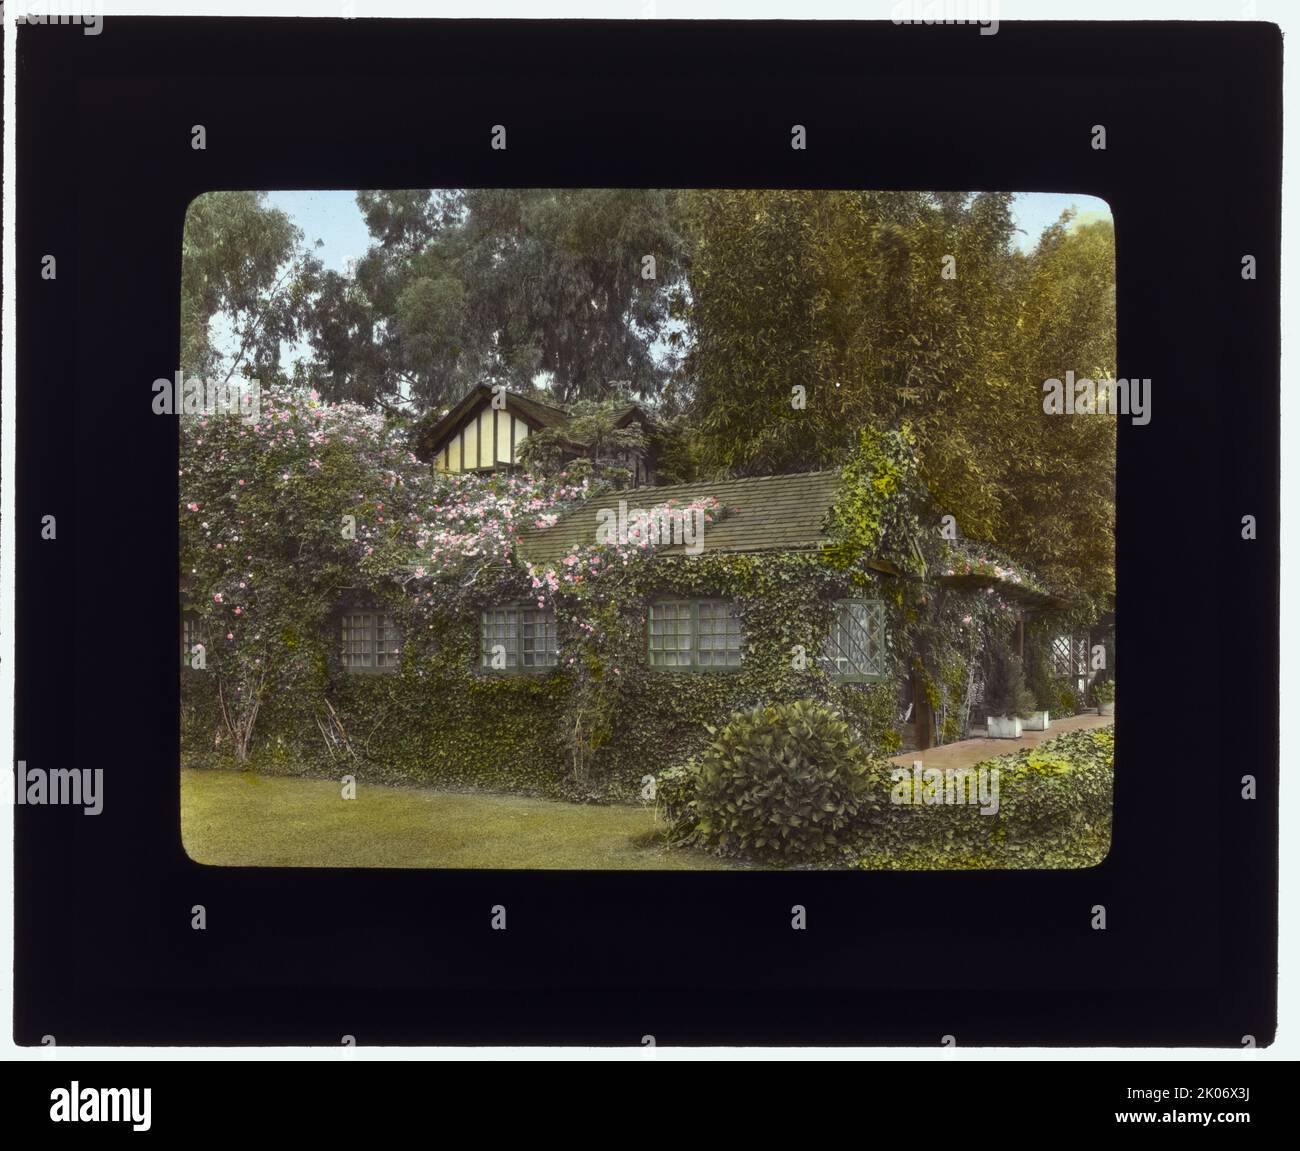 &quot;Inellan,&quot; Walter Douglas house, Channel Drive, Montecito, California, 1917. House Architecture: Francis Townsend Underhill, built 1902, with changes for Walter Douglas ca. 1906. Landscape: Francis Townsend Underhill, from 1902. Stock Photo